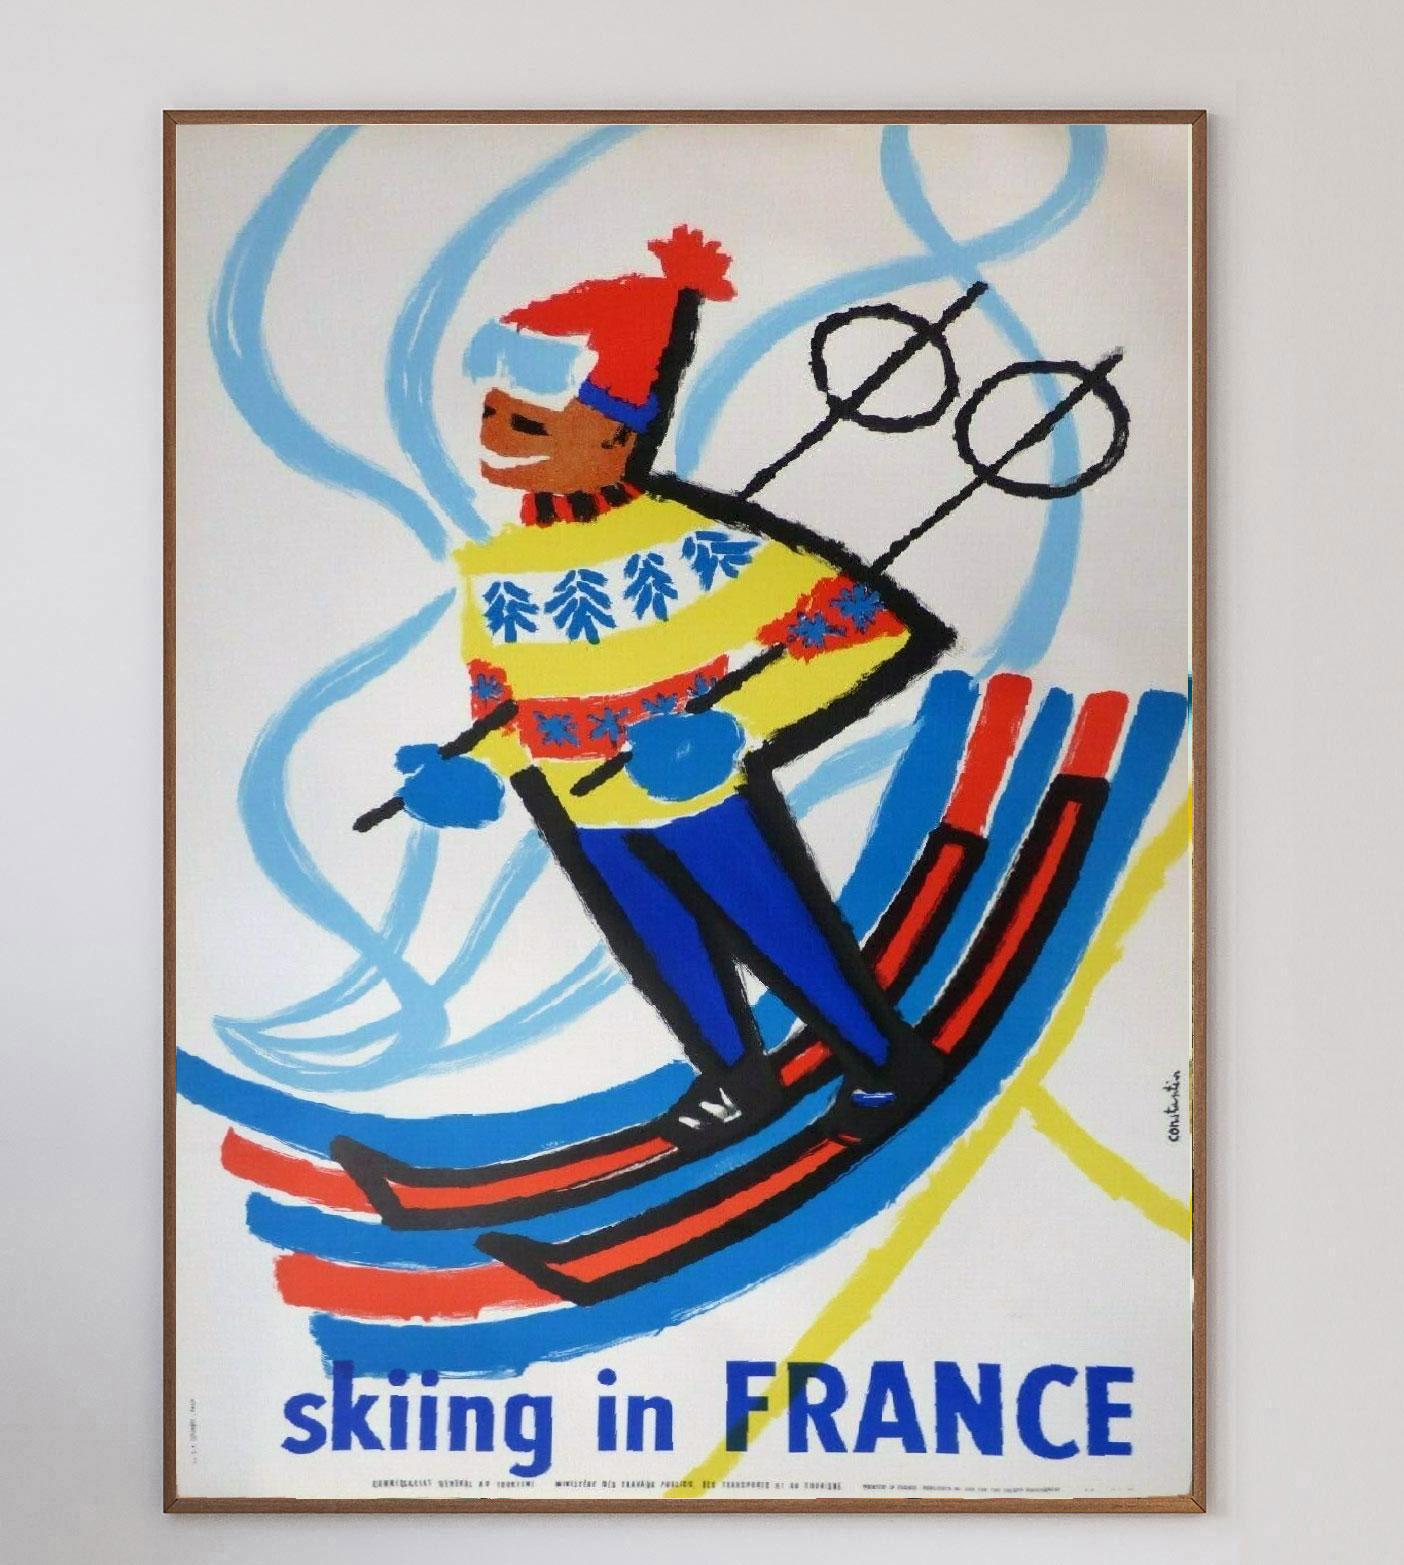 Beautifully illustrated and exceptionally maintained, this Skiing In France poster was created by the French Tourism Board to advertise ski holidays in the country in 1959.

With artwork by Constantin and printed by Courbet in Paris, the colourful